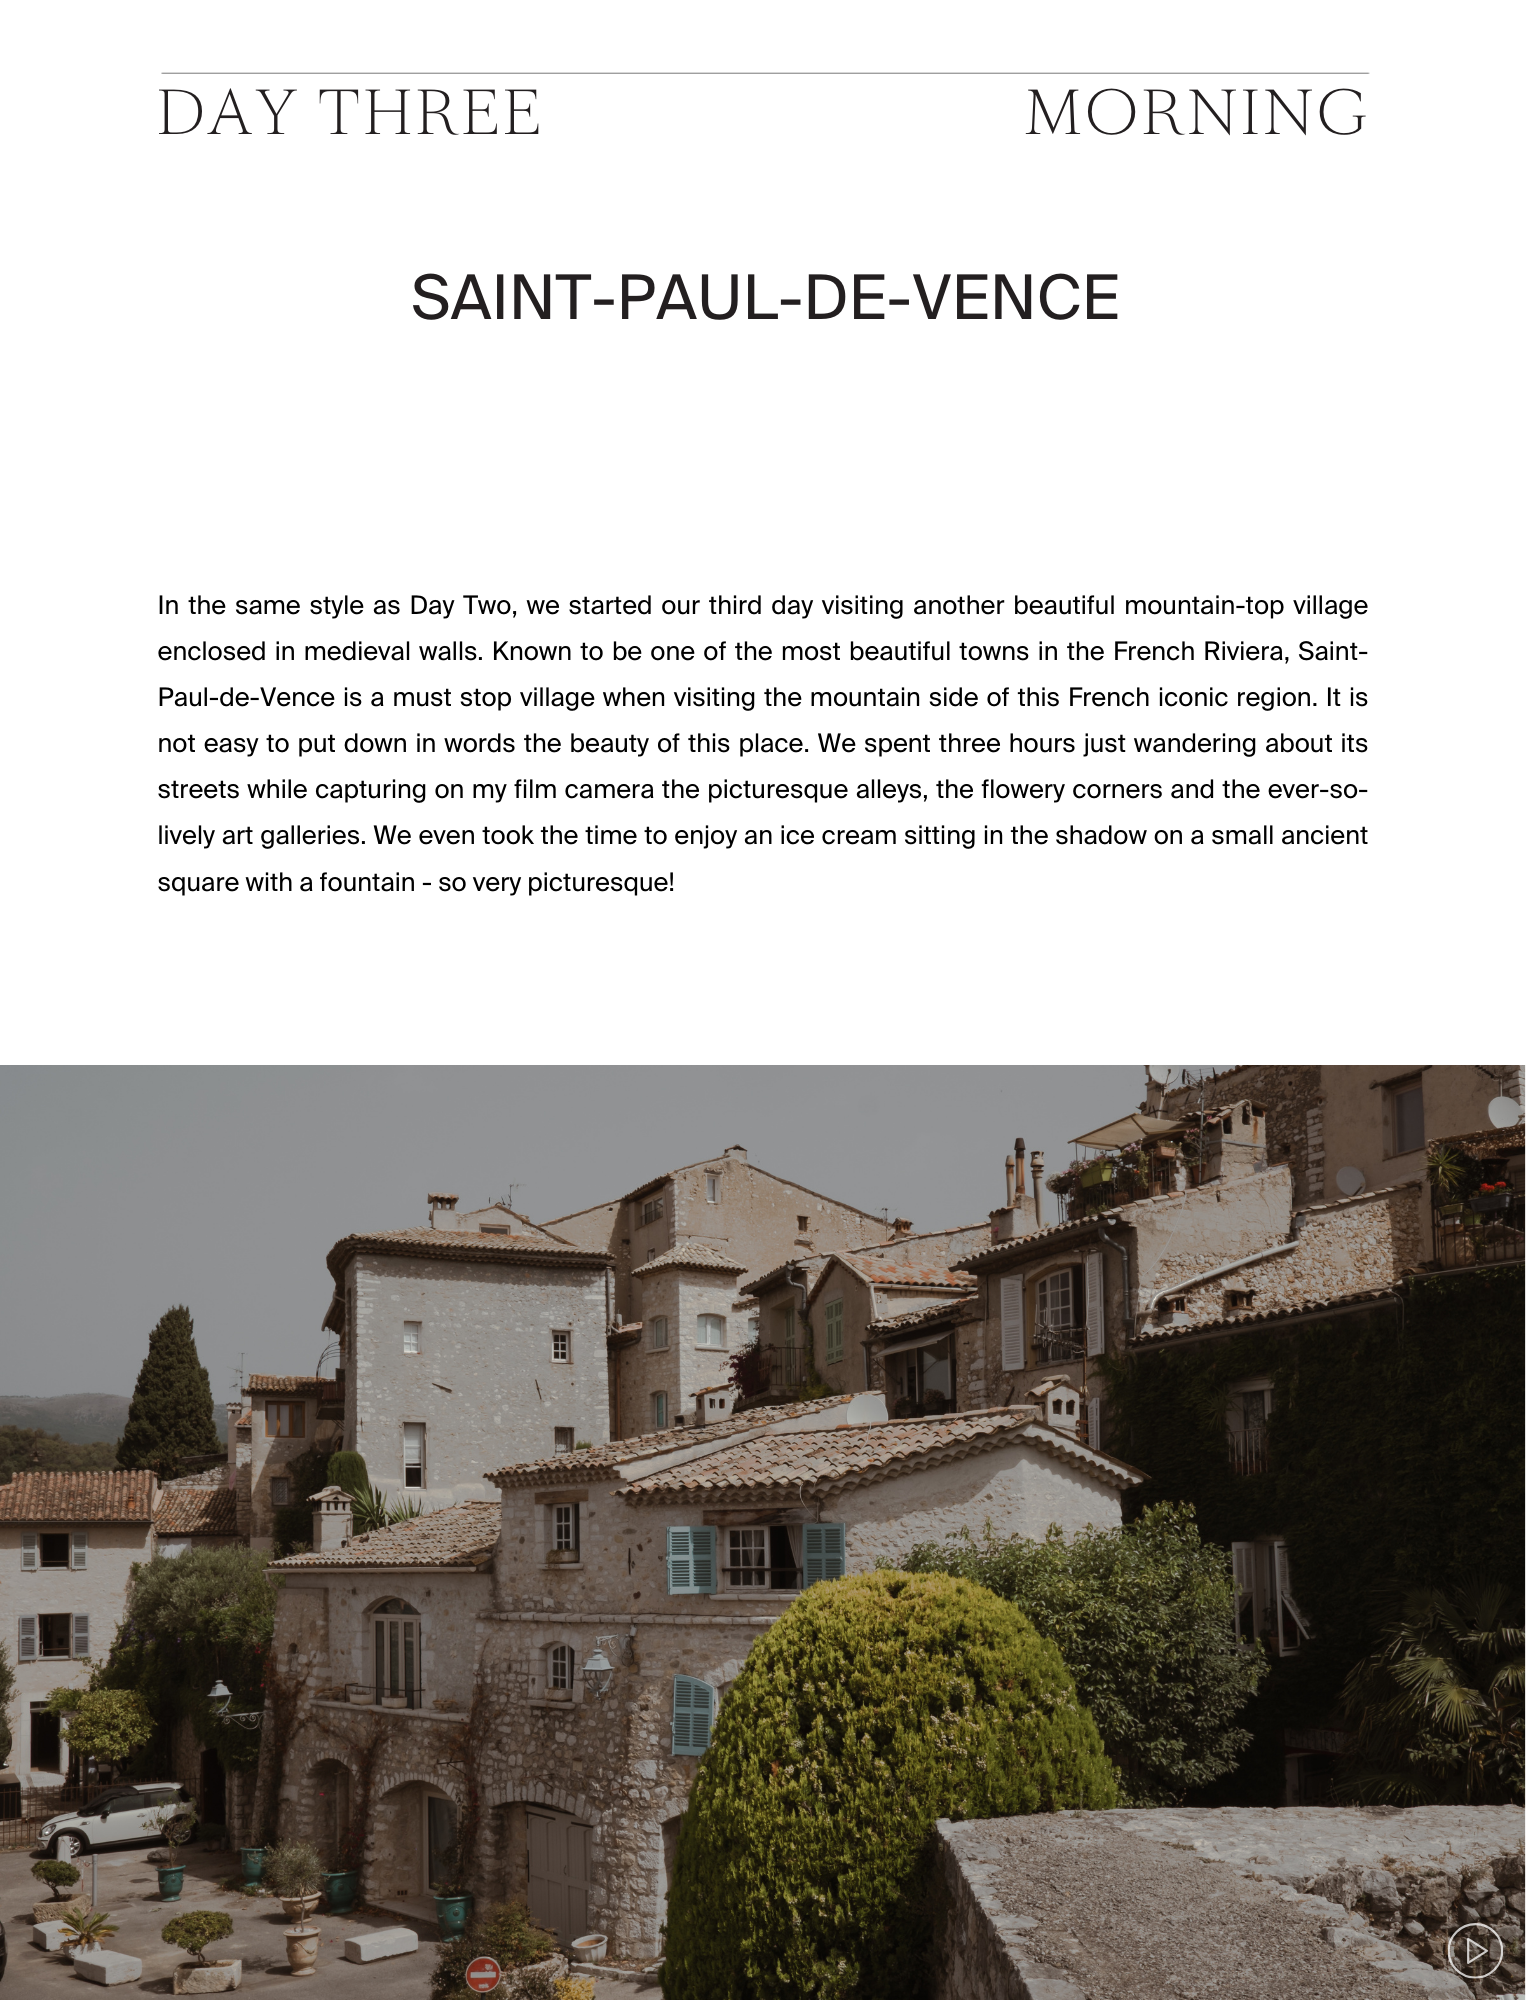 A Guide to the French Riviera & Provence - a page on Saint-Paul-de-Vence, by Simply Slow Traveler